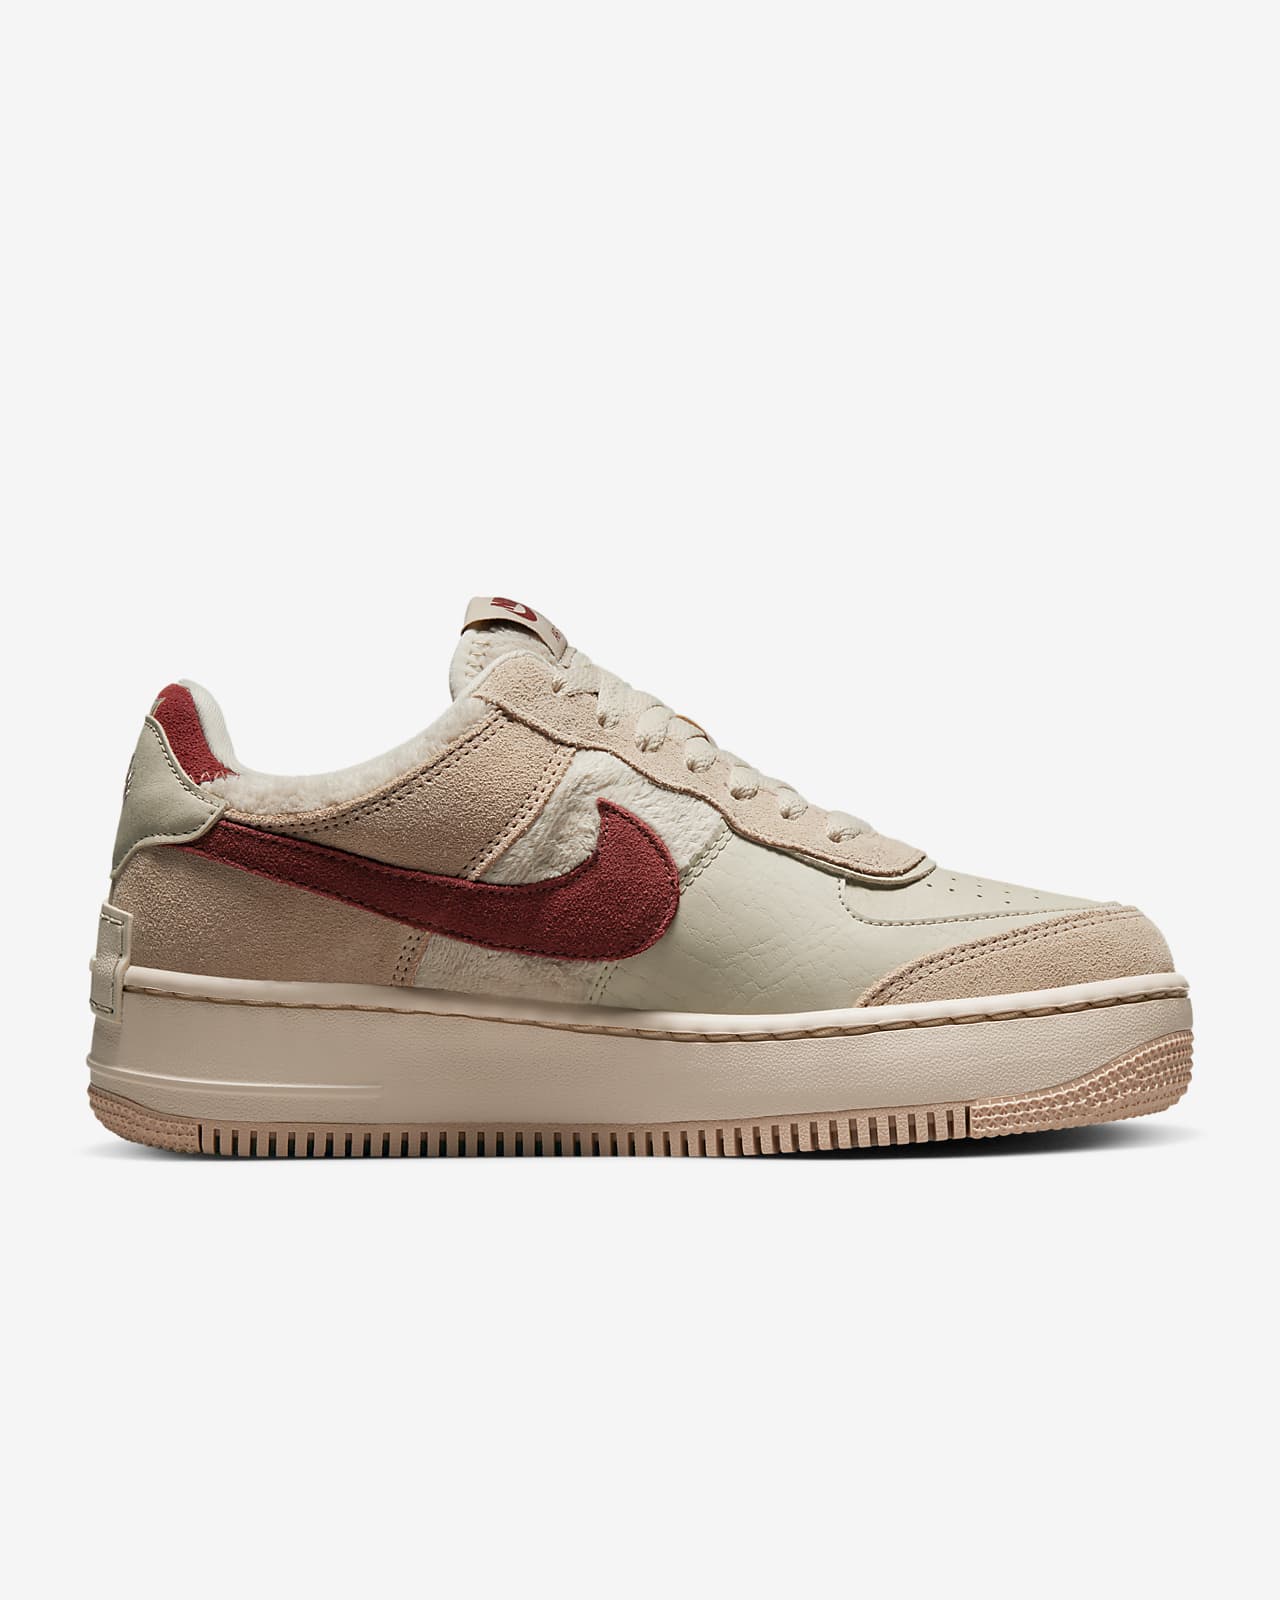 Snooze Spit out disconnected Nike Air Force 1 Shadow Women's Shoes. Nike.com